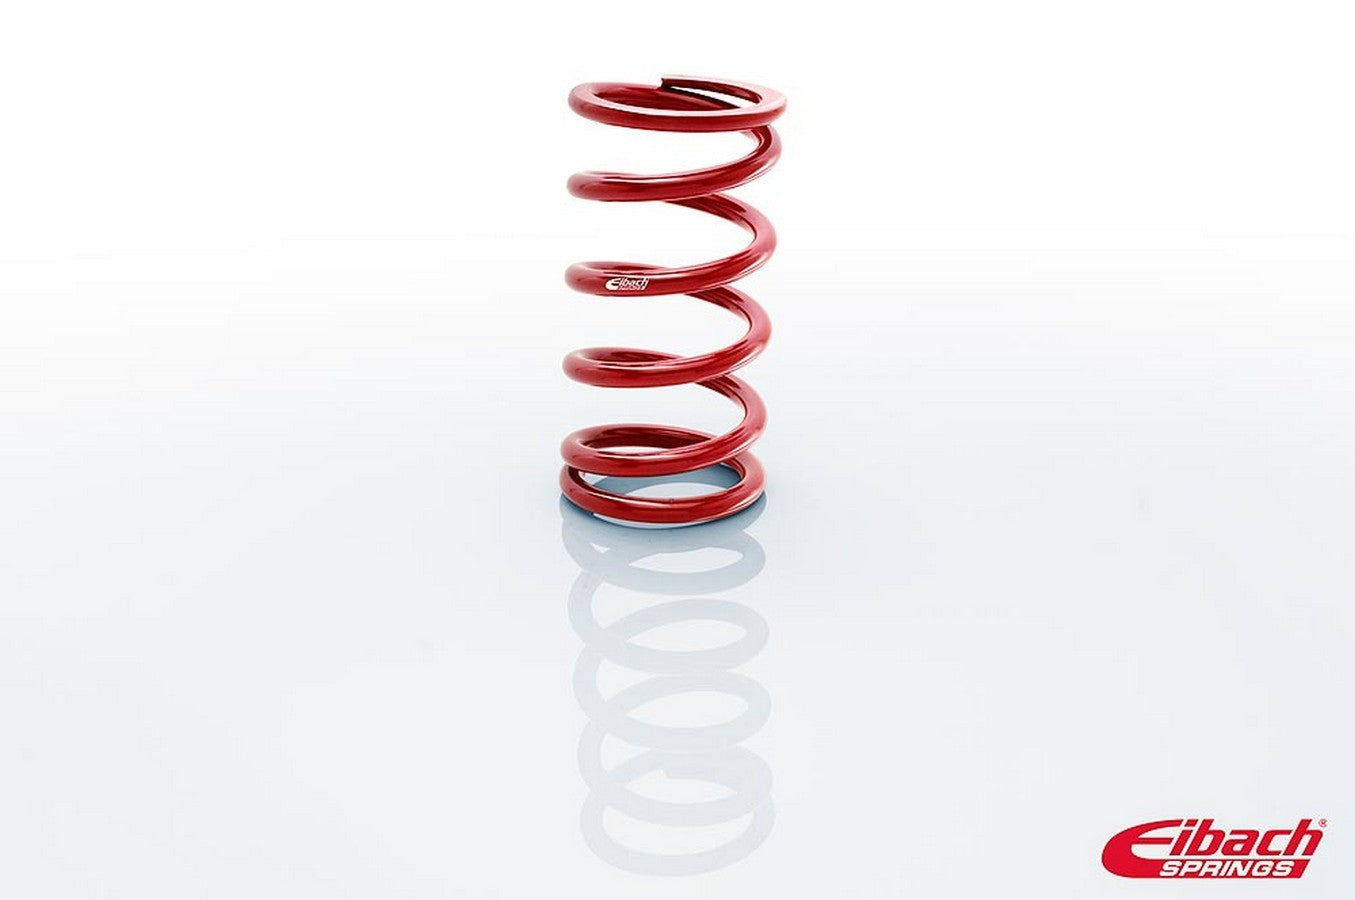 Coil Spring - Coil-Over - 5 in OD - 9.5 in Length - 550 lb/in Spring Rate - Front - Steel - Red Powder Coat - Each